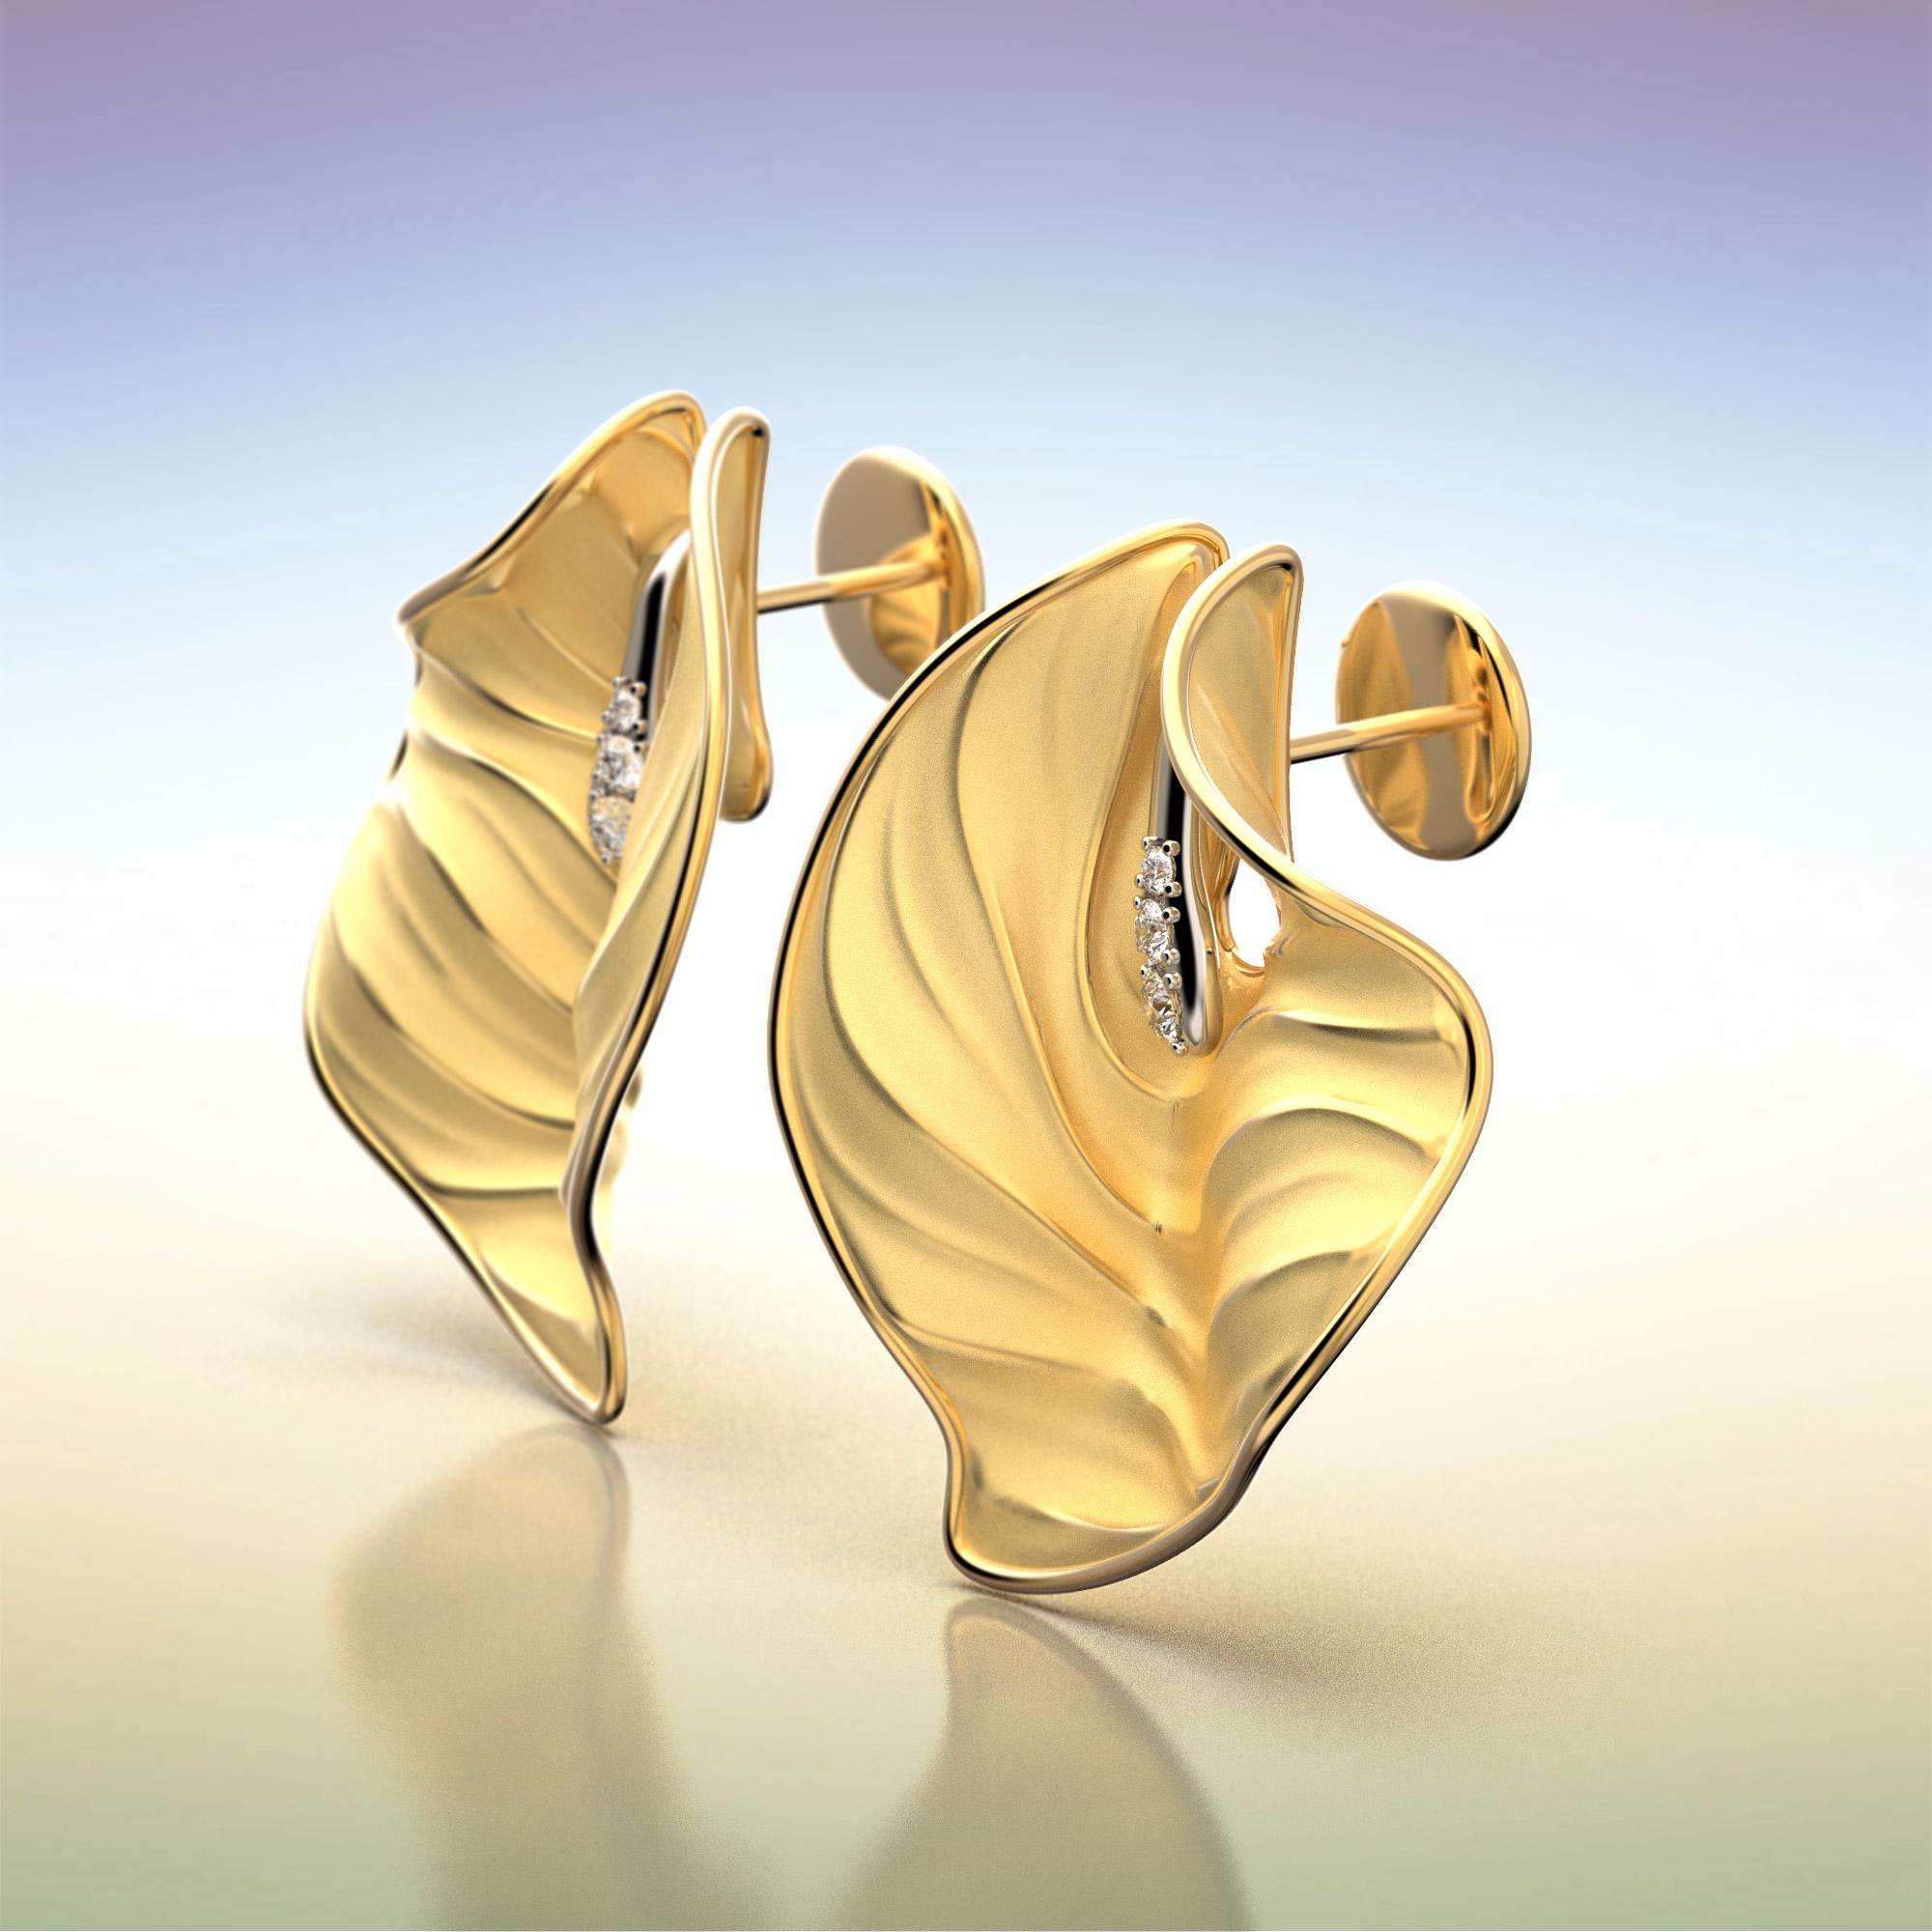 Contemporary Oltremare Gioielli Gold Earrings Made in Italy, 14k Gold Earrings with Diamonds For Sale